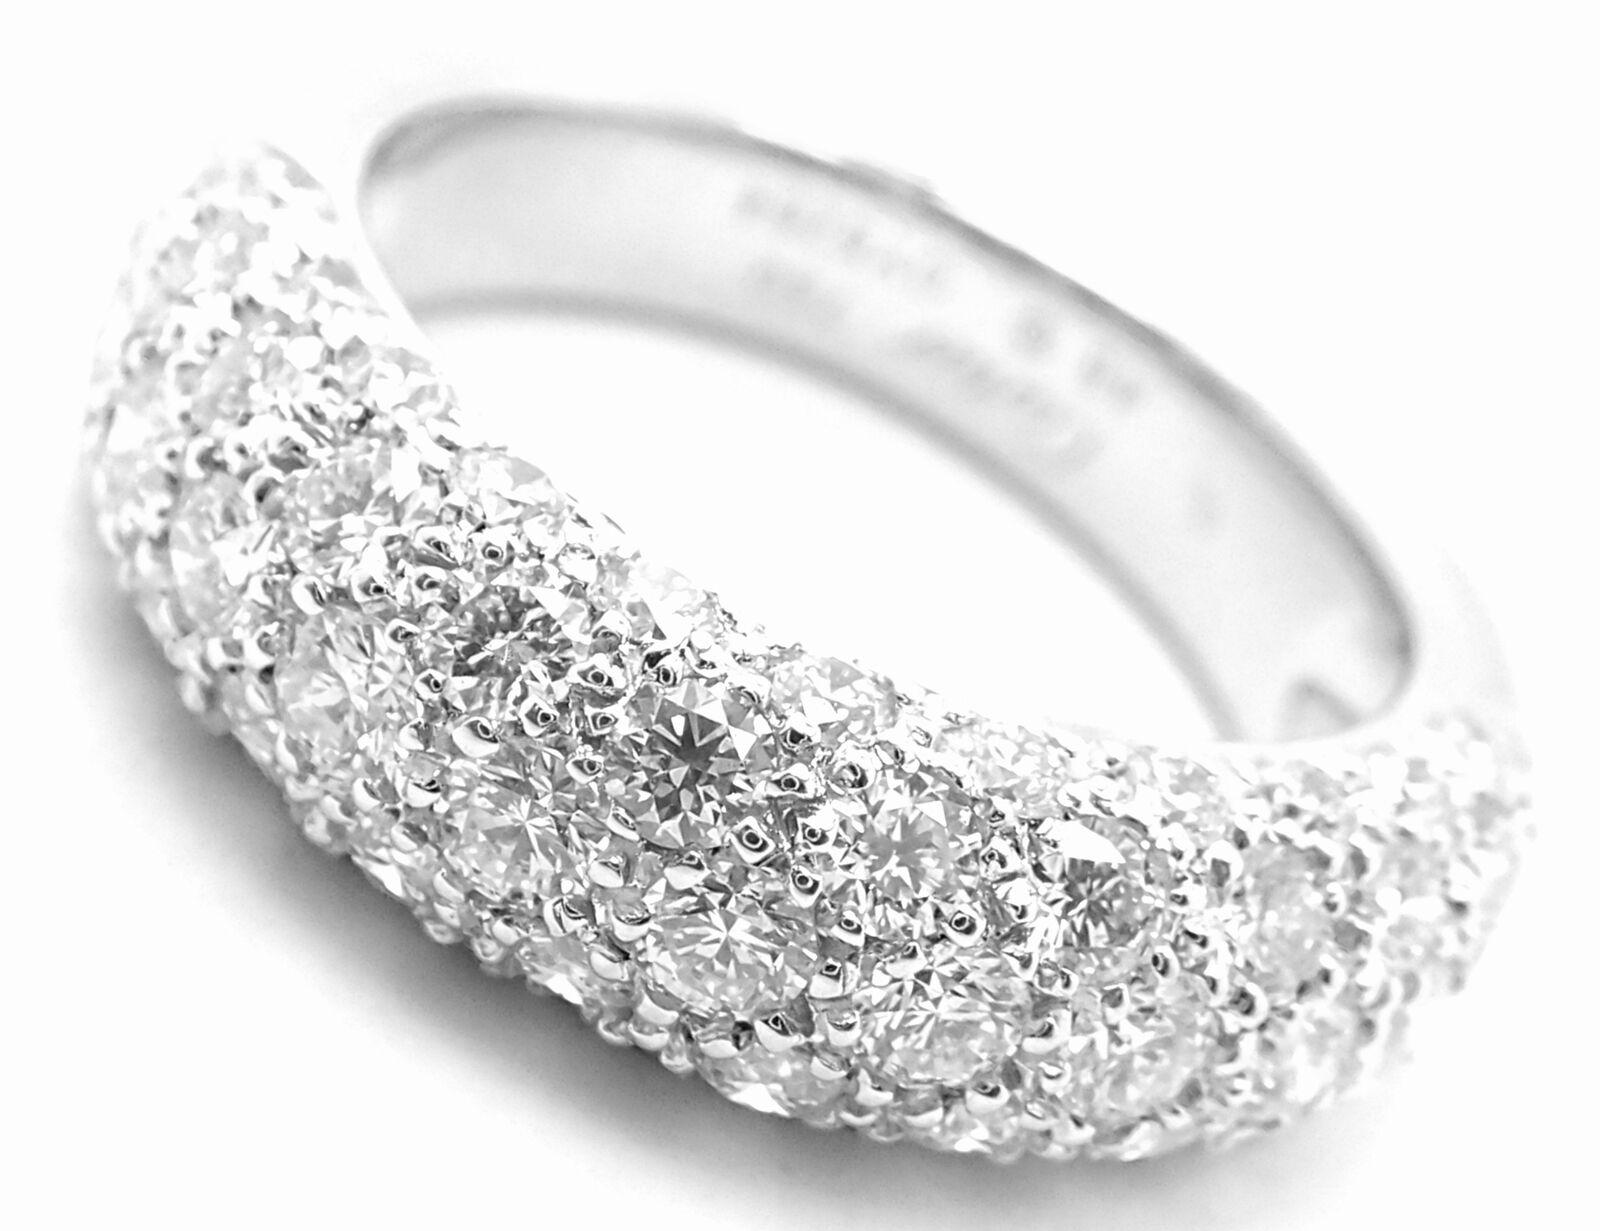 18k White Gold Diamond Etincelle De Cartier Band Ring by Cartier.  
With 59 Round brilliant cut diamonds VVS1 clarity, E color total weight approximately 1.33ct
This ring comes with original Cartier box and Cartier certificate of